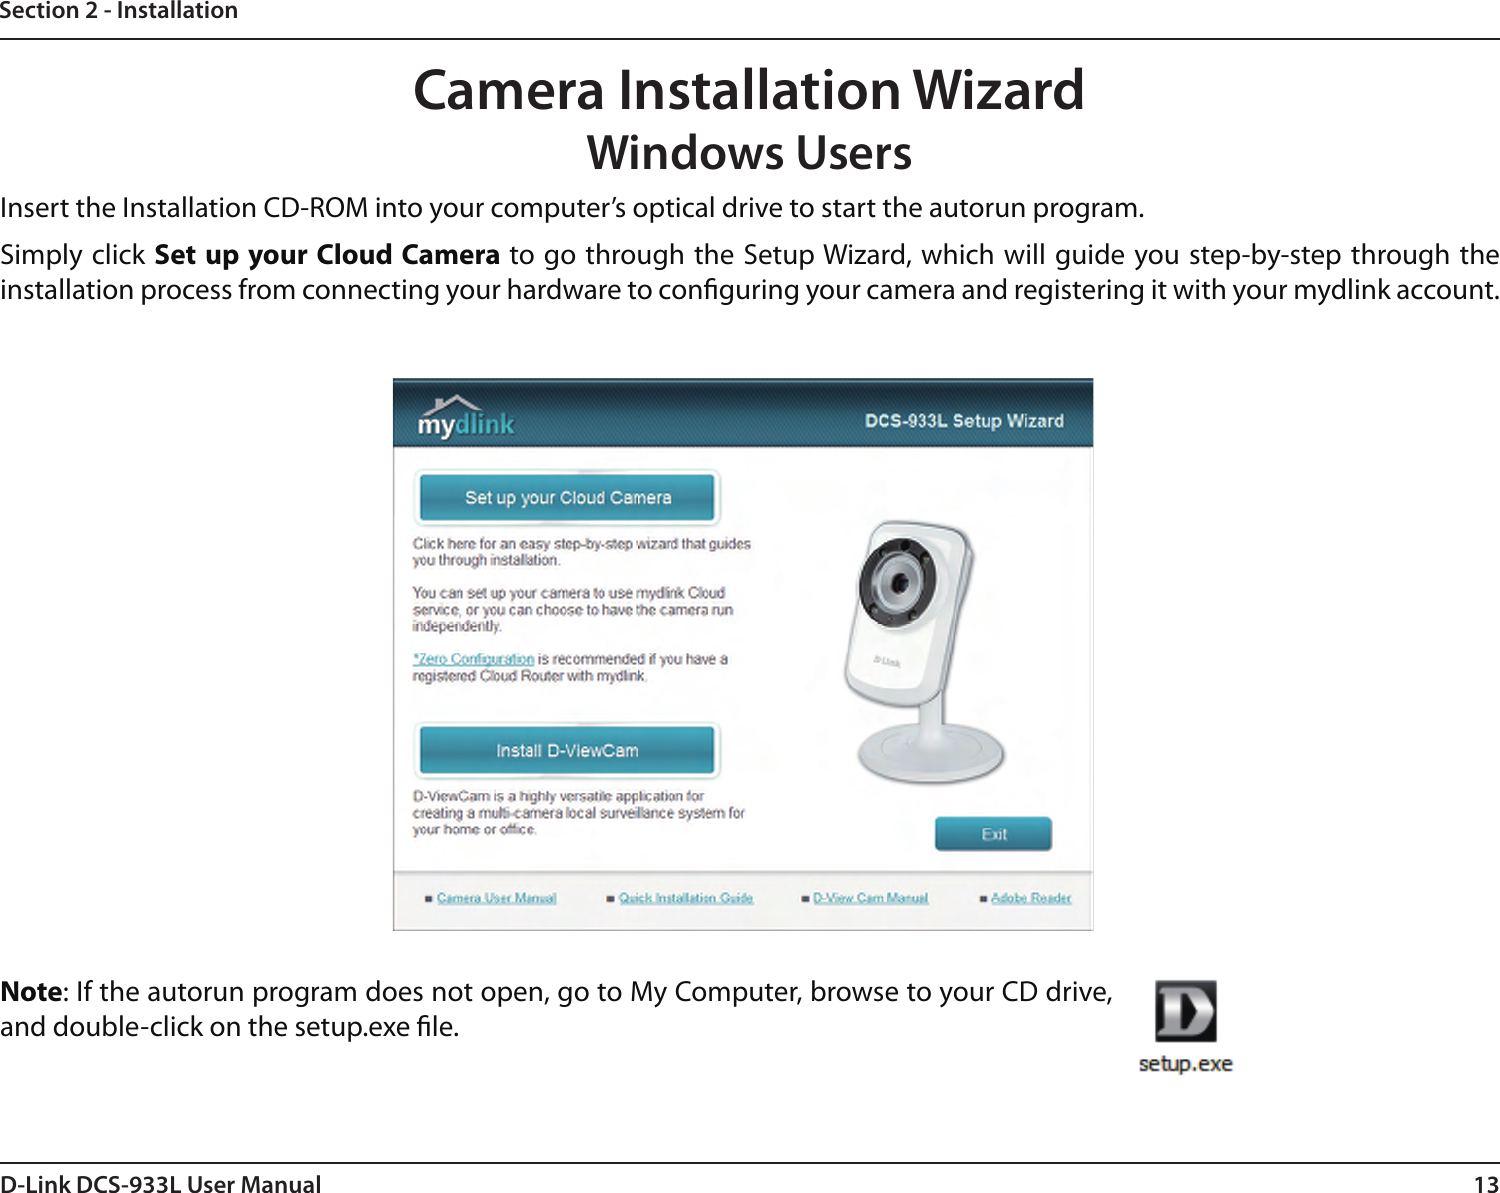 13D-Link DCS-933L User ManualSection 2 - InstallationCamera Installation WizardWindows UsersNote: If the autorun program does not open, go to My Computer, browse to your CD drive, and double-click on the setup.exe le.Insert the Installation CD-ROM into your computer’s optical drive to start the autorun program. Simply click Set up your Cloud Camera to go through the Setup Wizard, which will guide you step-by-step through the installation process from connecting your hardware to conguring your camera and registering it with your mydlink account.